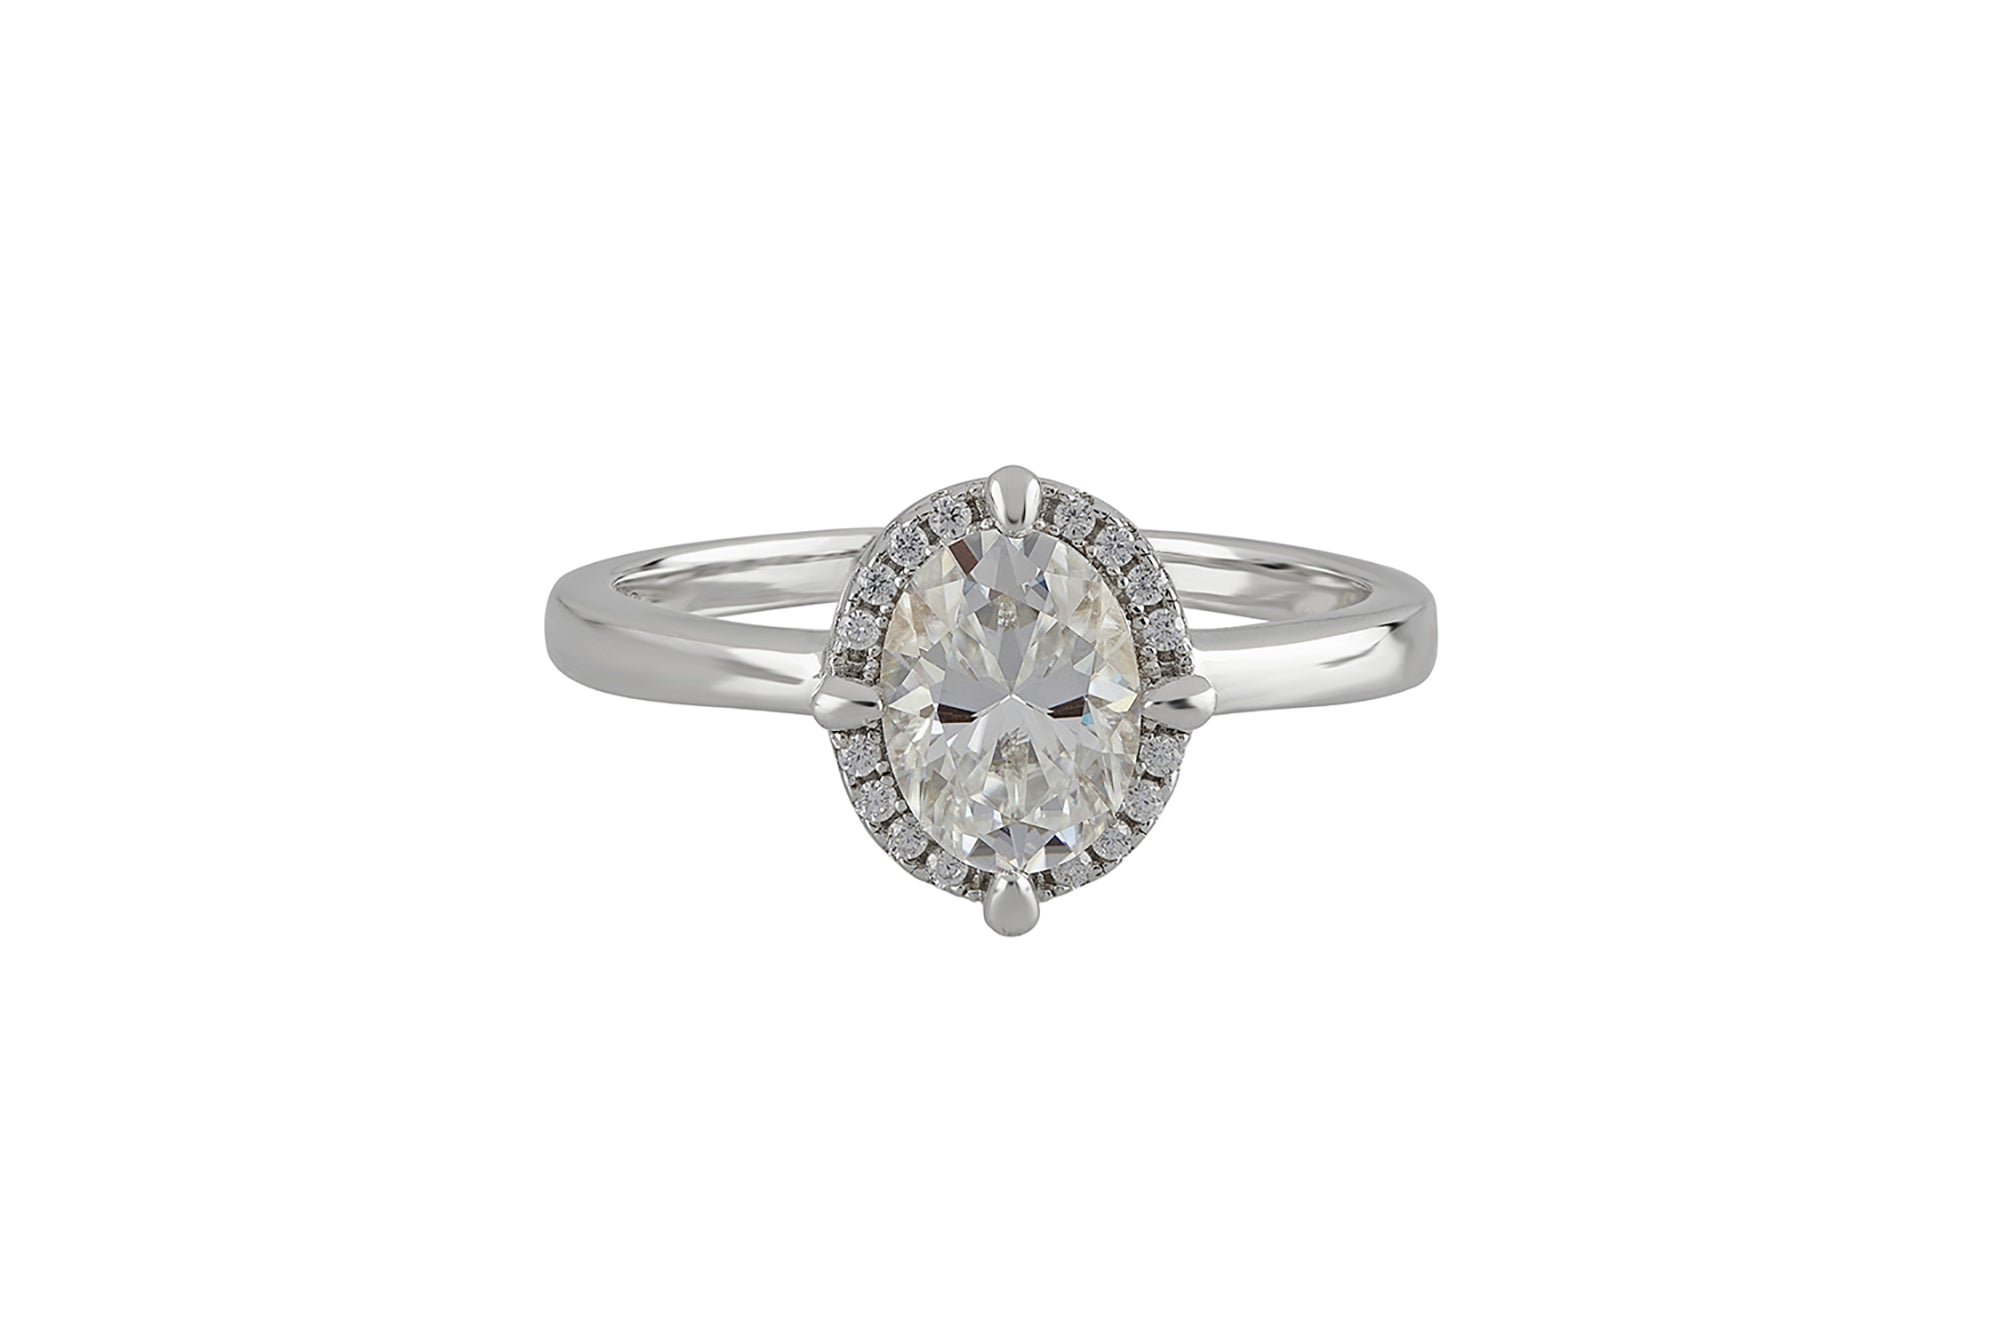 Solitaire Moissanite Ring in Sterling Silver 